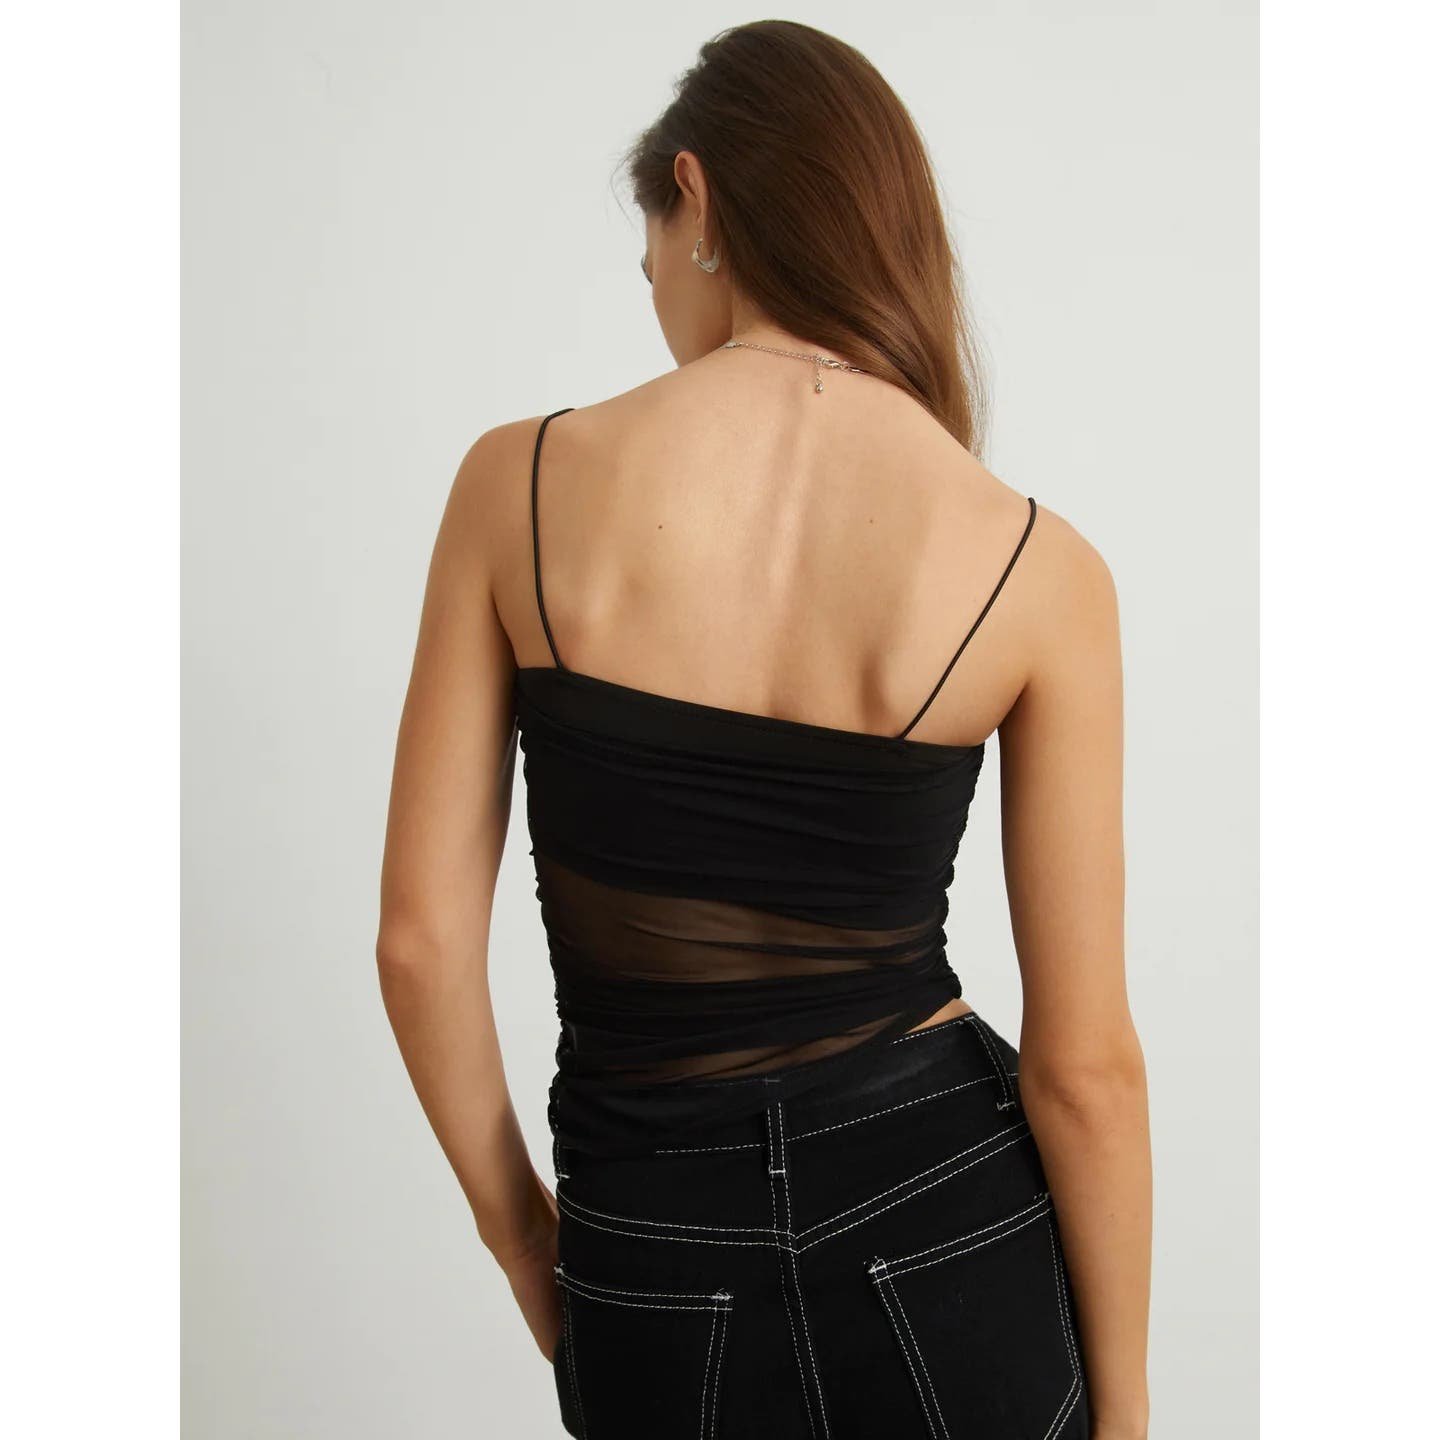 Perfect Commense Black Ruched Mesh Cami Crop Top XS NWT m8iKmKqal for sale